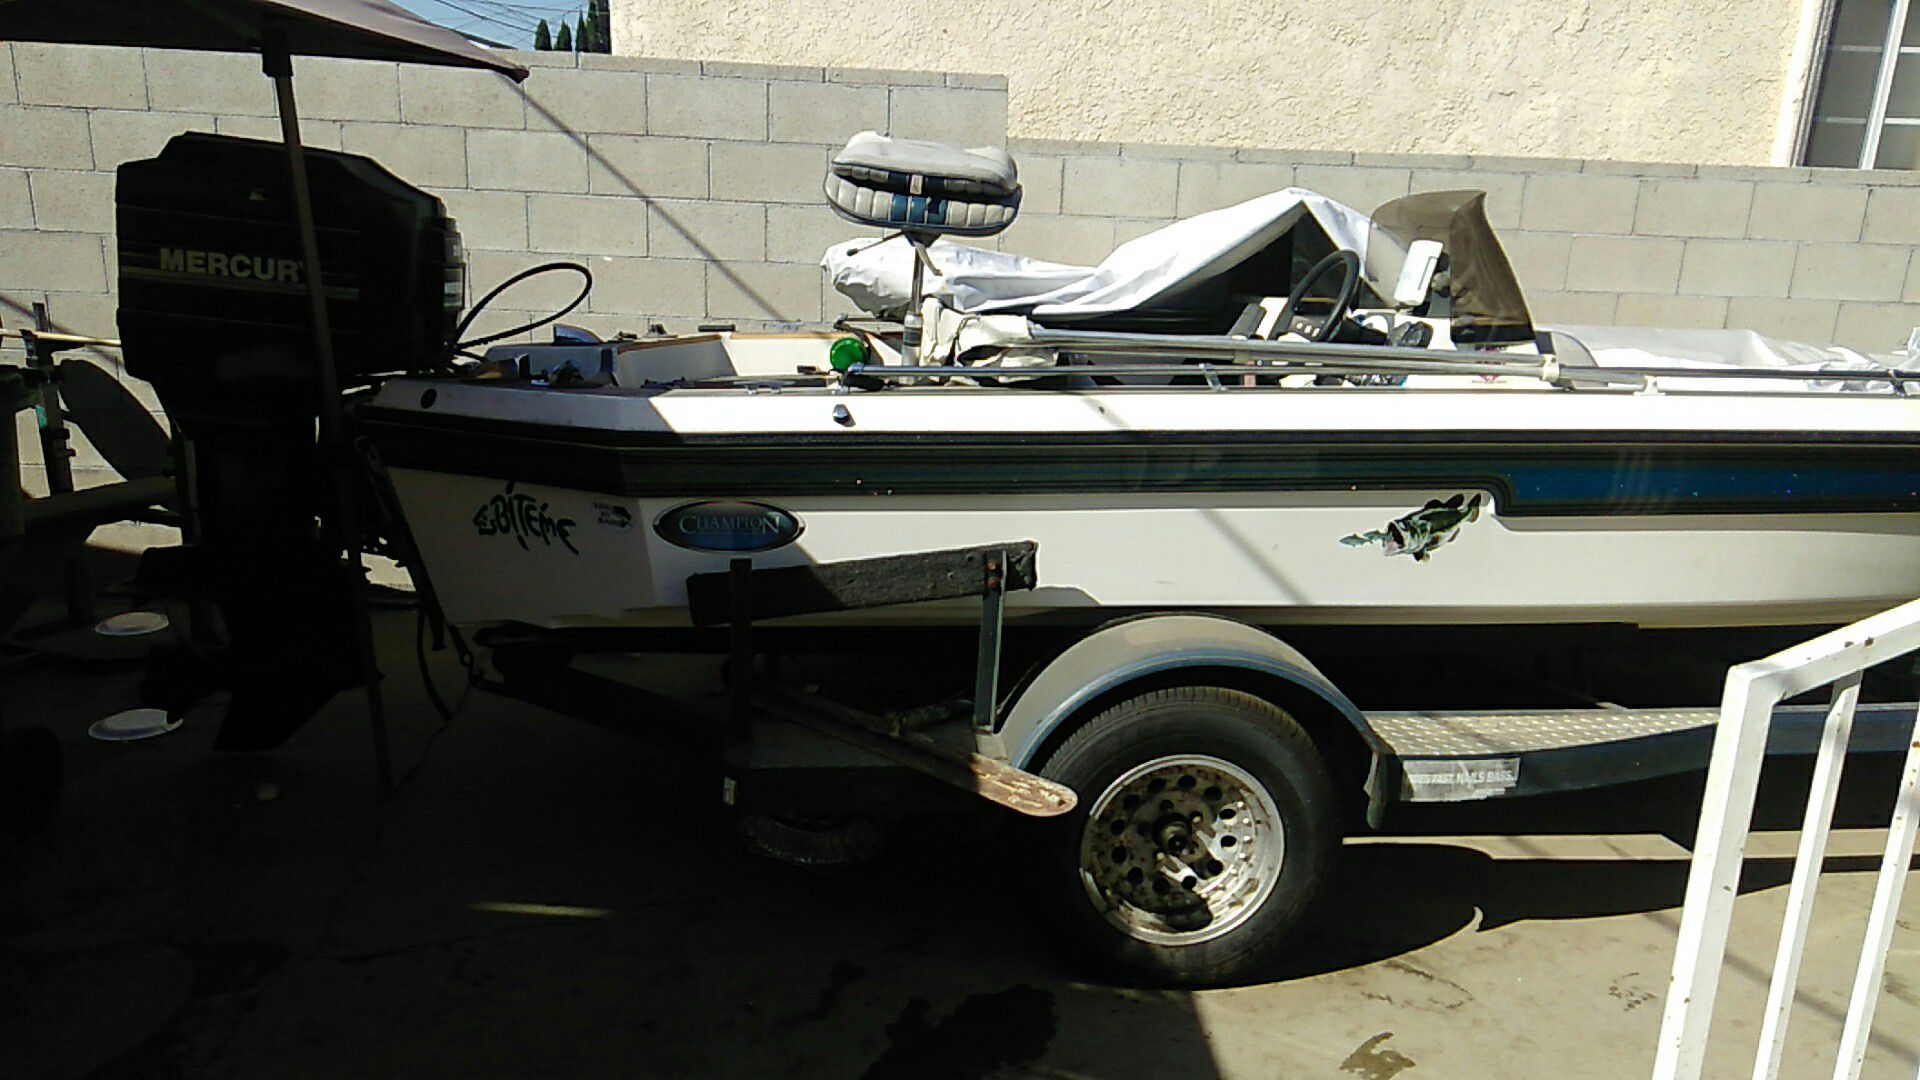 1993 champion bass/ski/family boat 19foot our trade for ocean boat